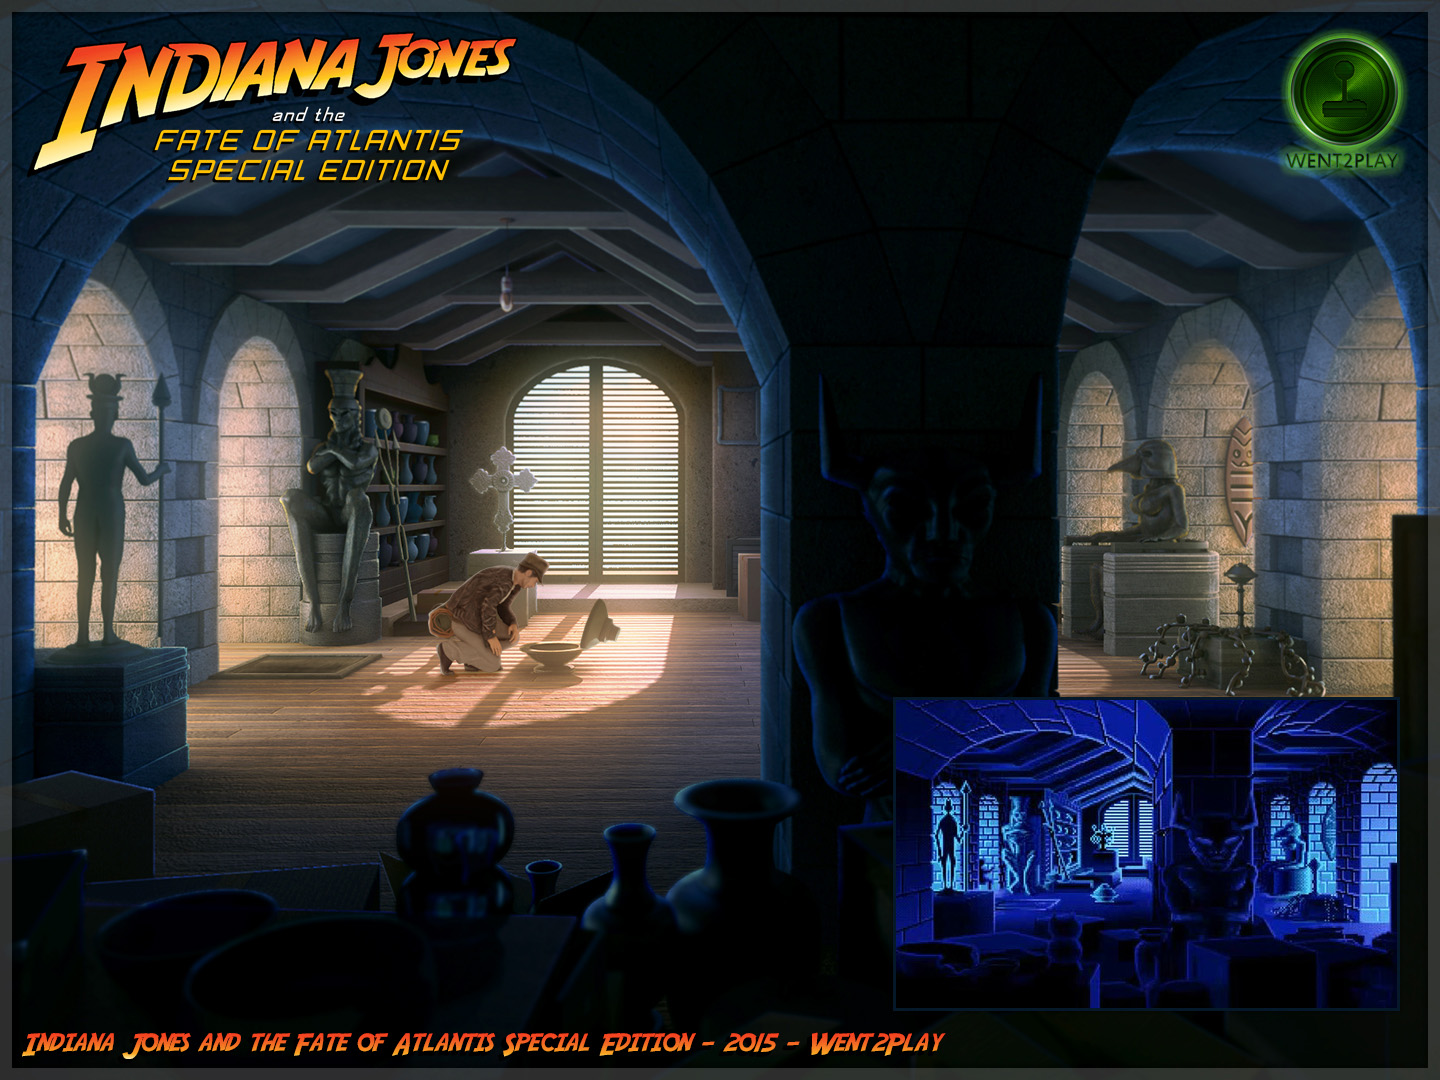 The fate of atlantis. Indiana Jones and the Fate of Atlantis 1992. Игра Indiana Jones and the Fate of Atlantis. Indiana Jones and the Fate of Atlantis Special Edition.